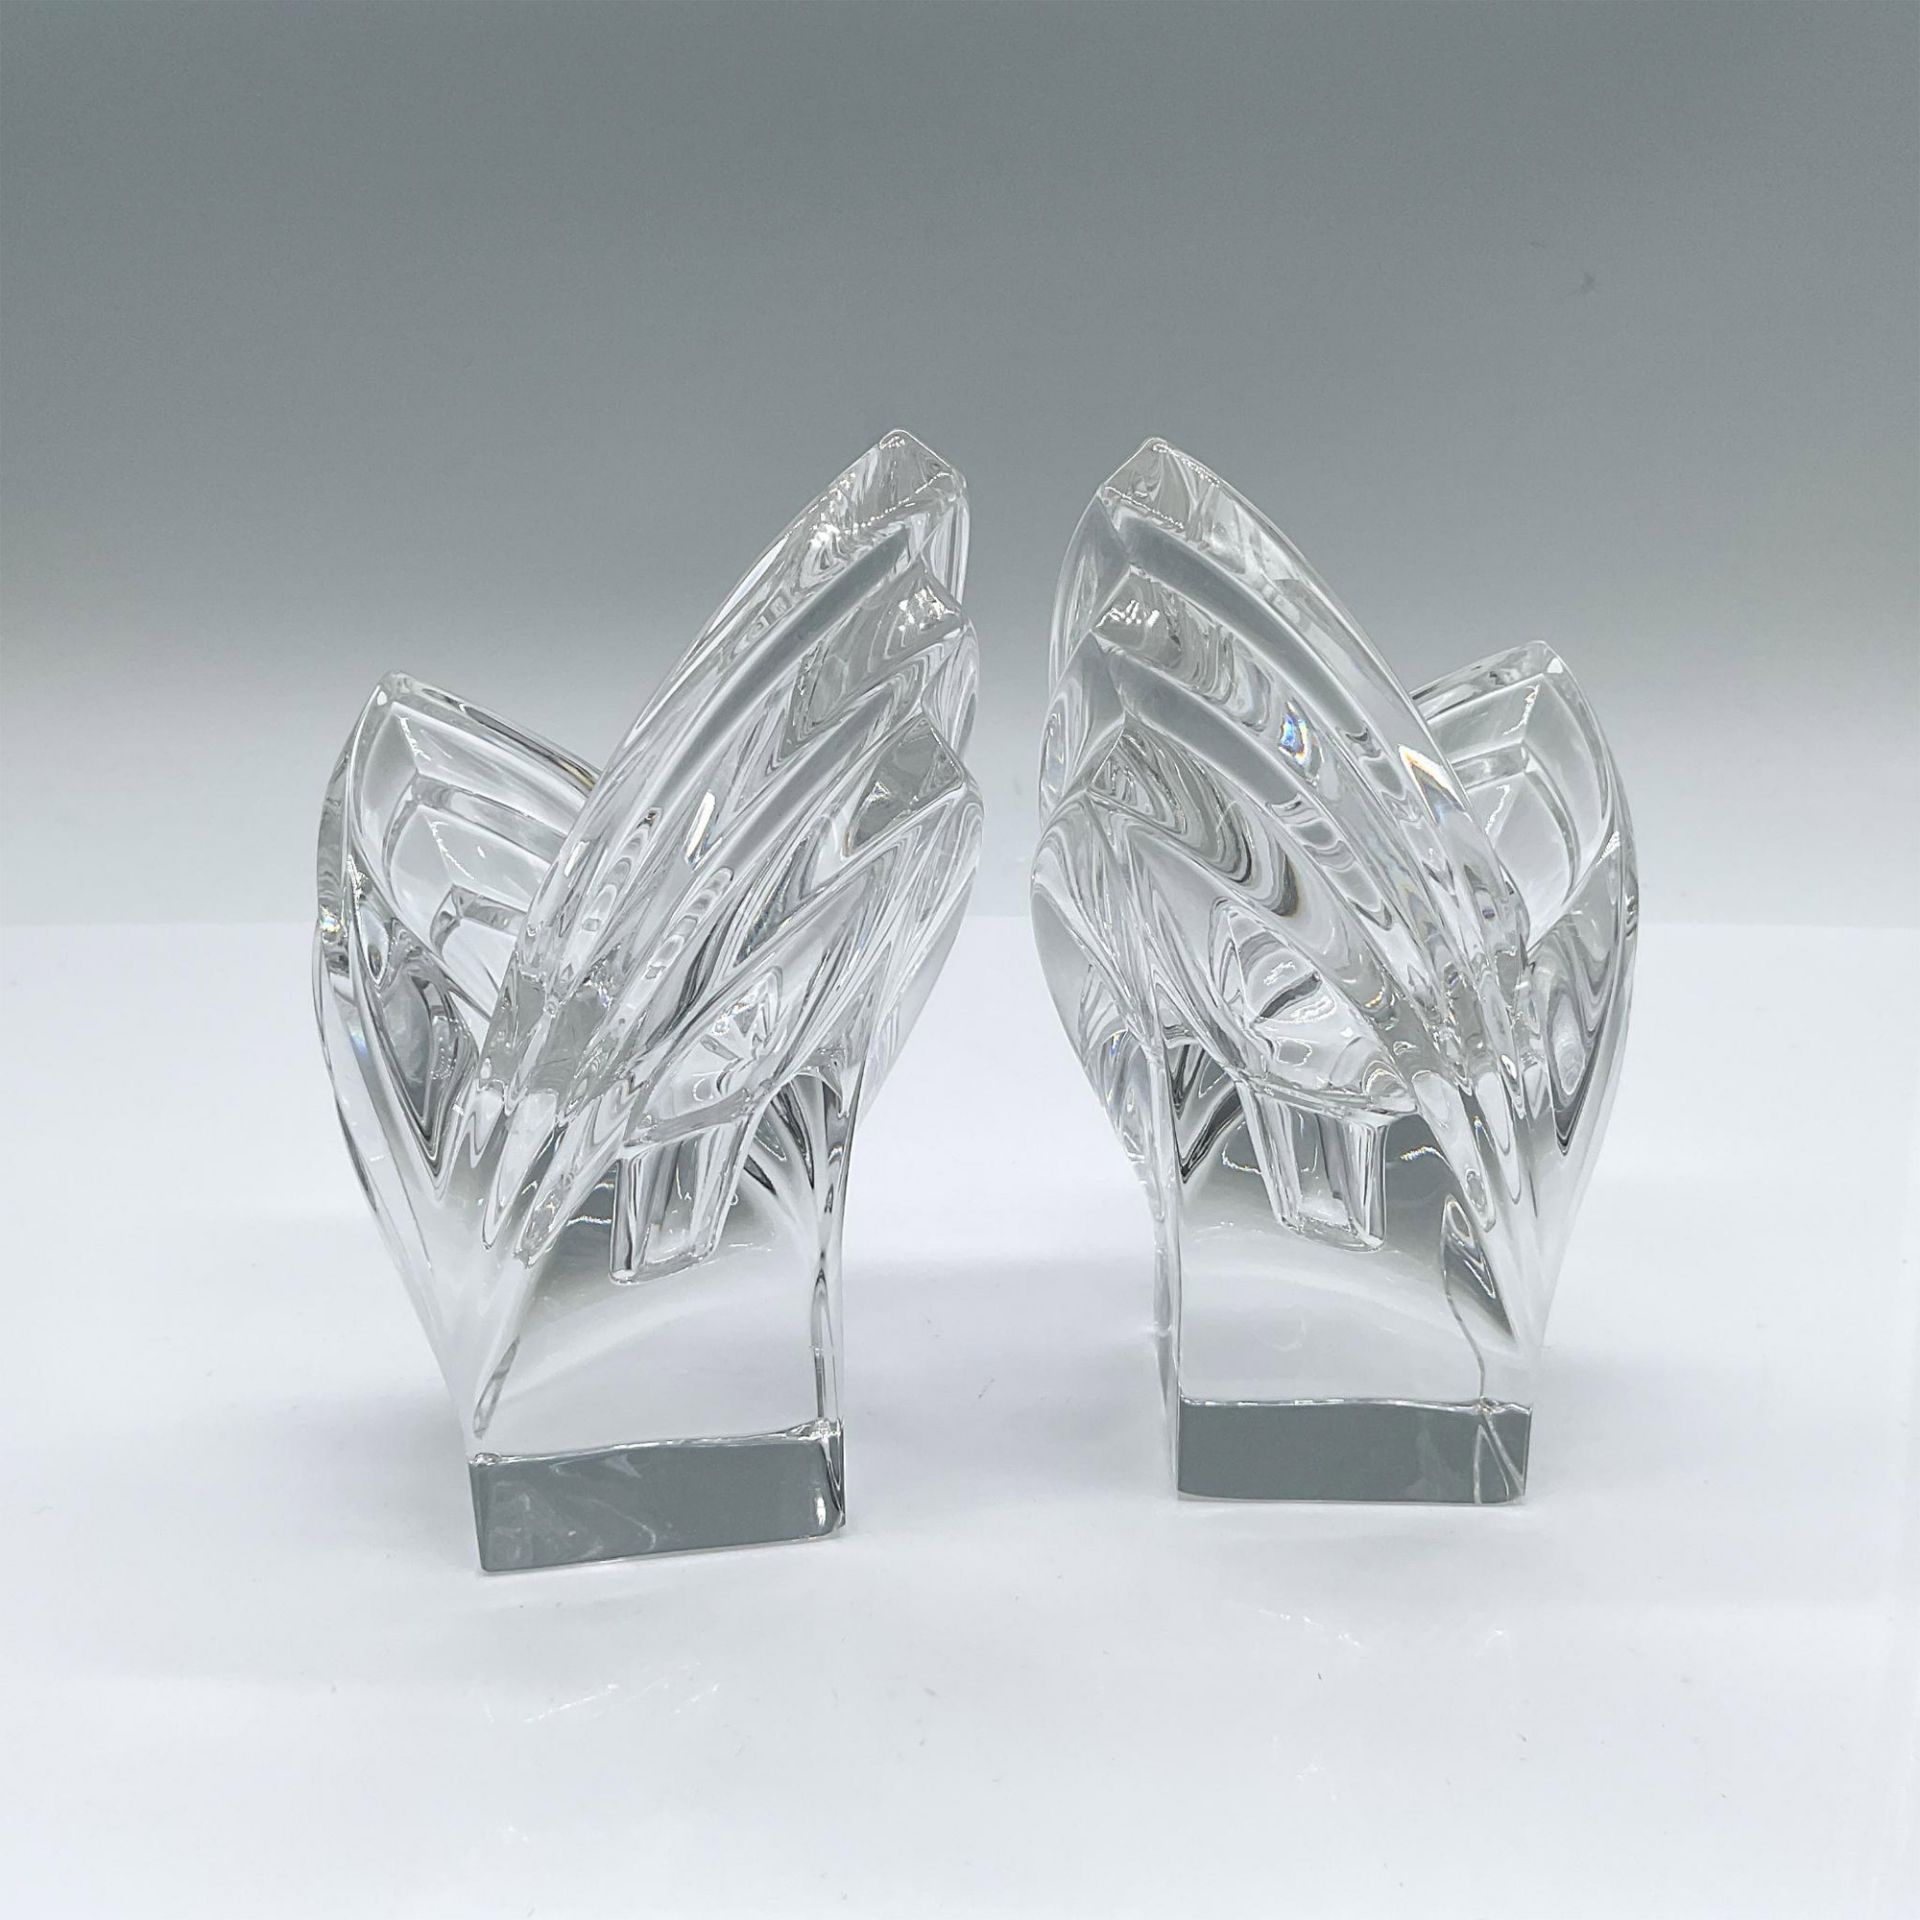 Pair of Mikasa Crystal Candlestick Holders, Deco - Image 3 of 4